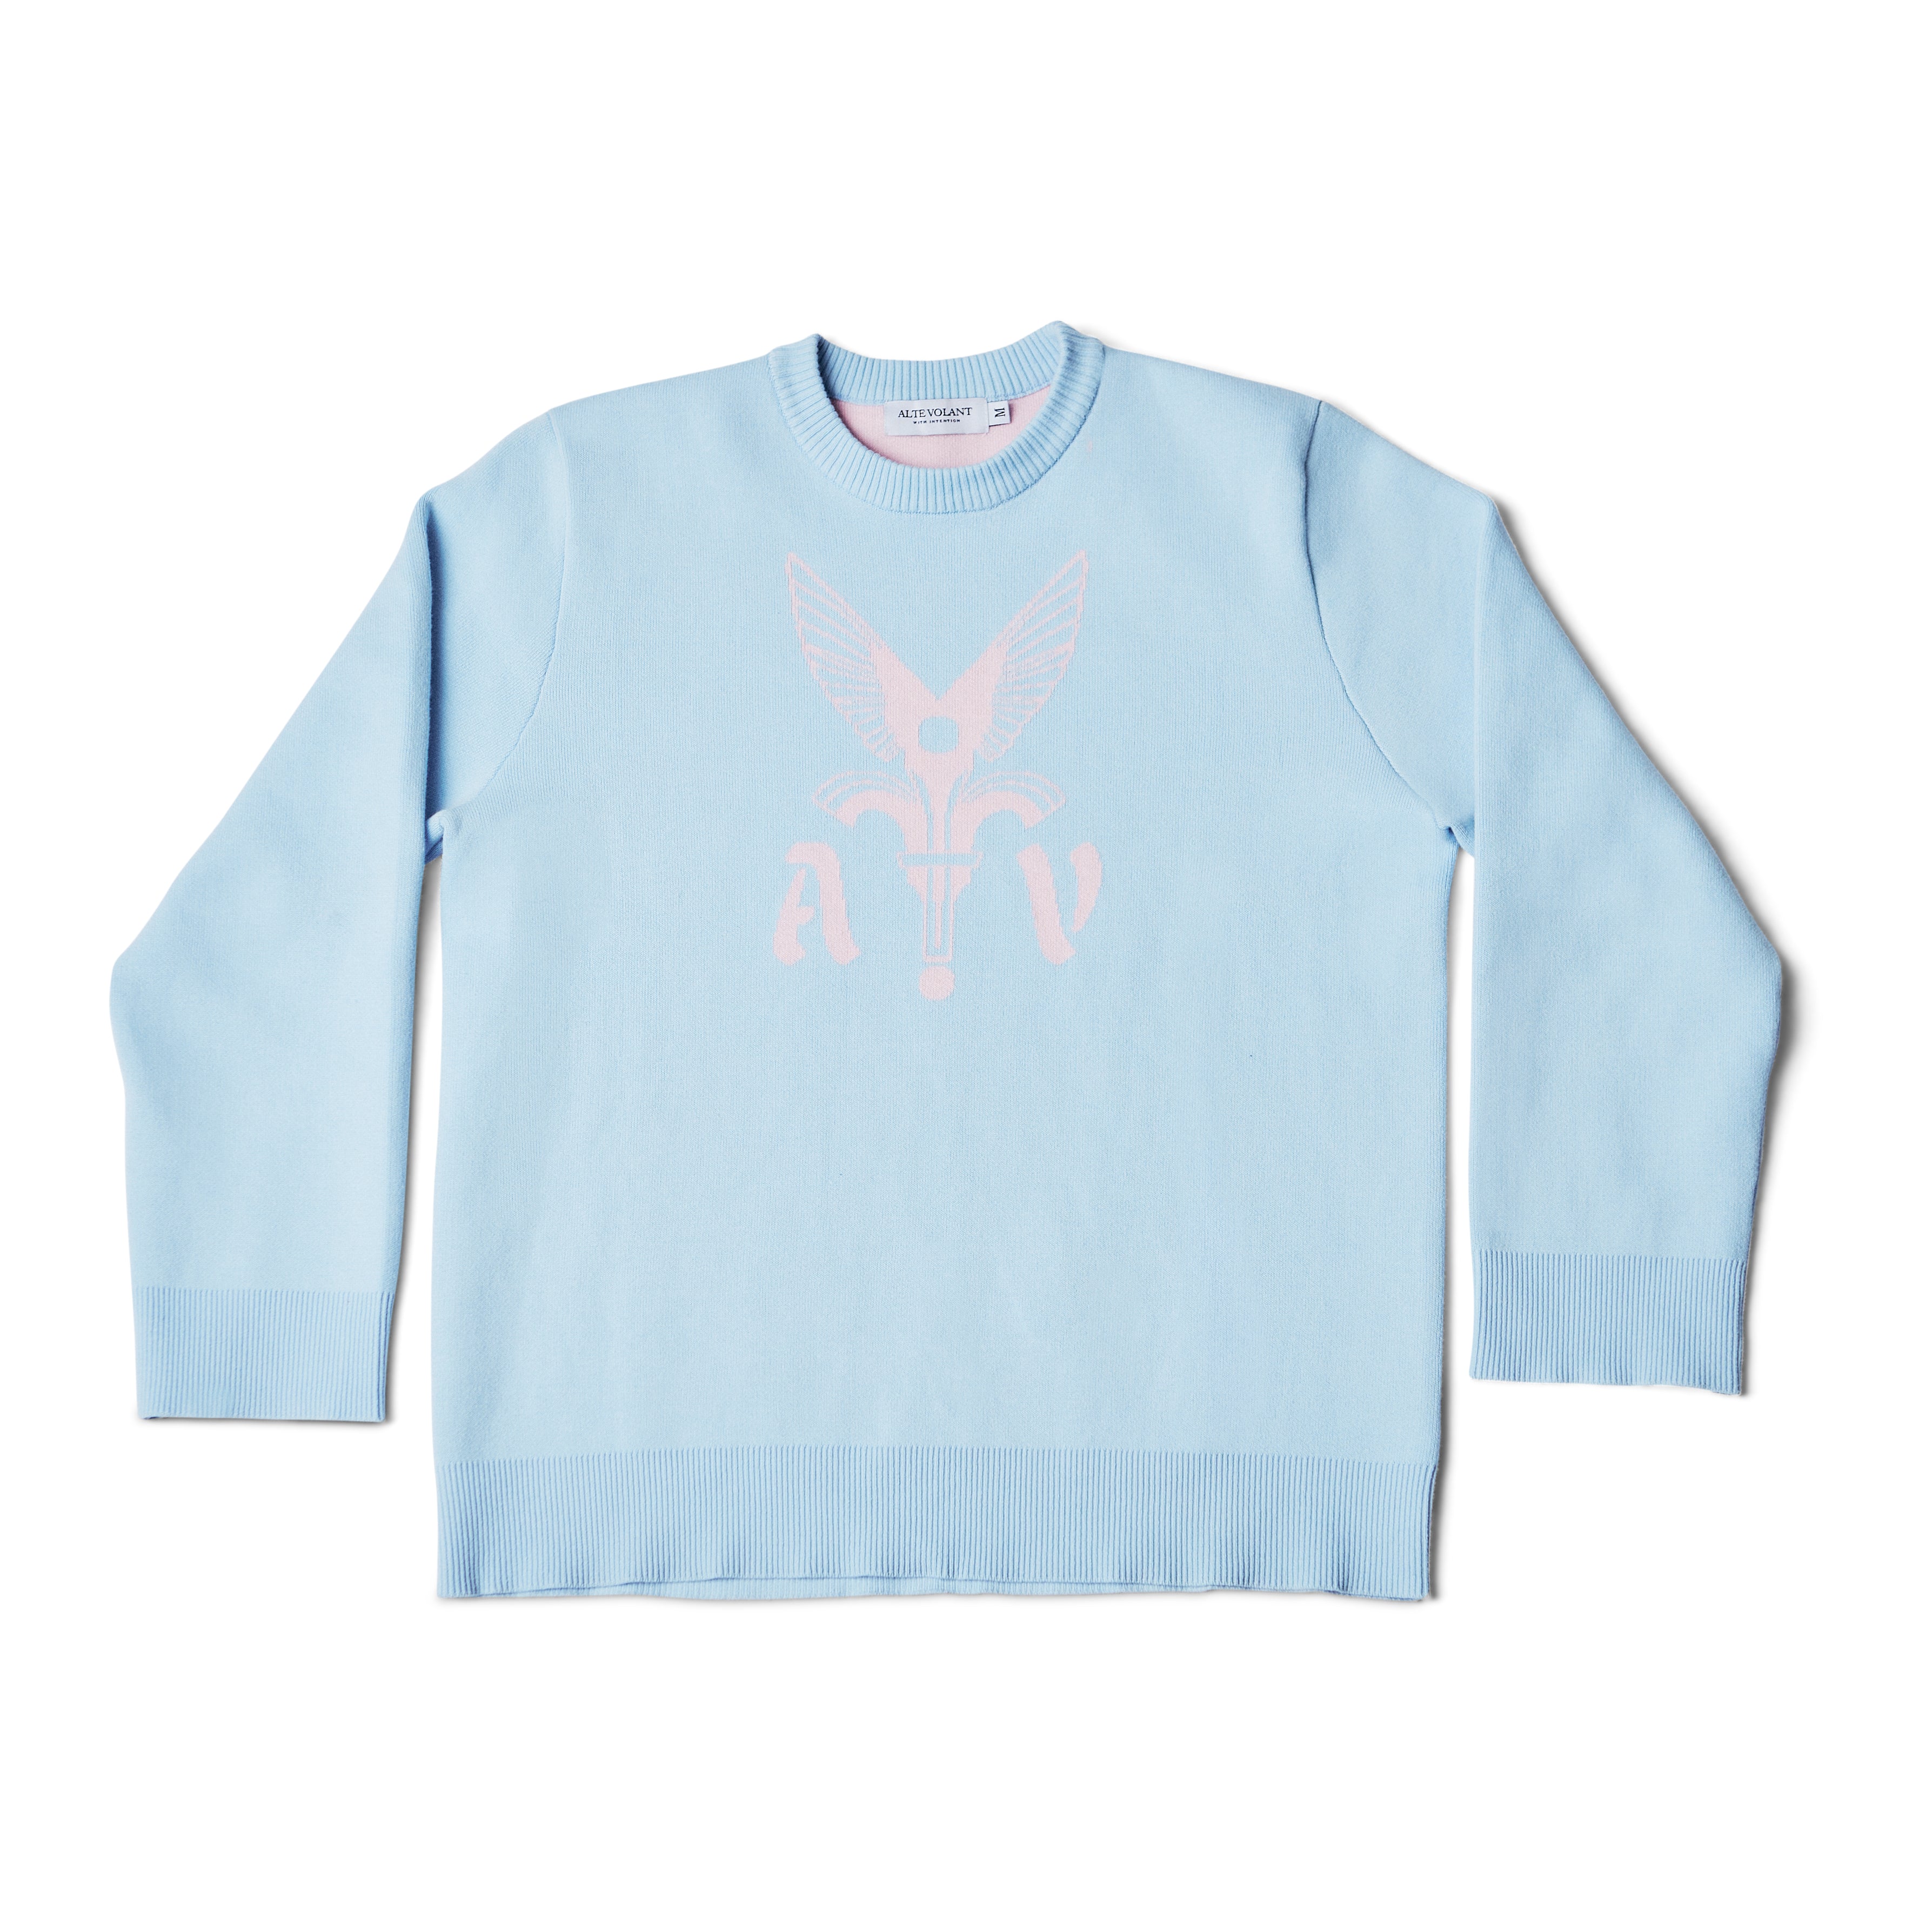 COTTON CANDY KNIT SWEATER